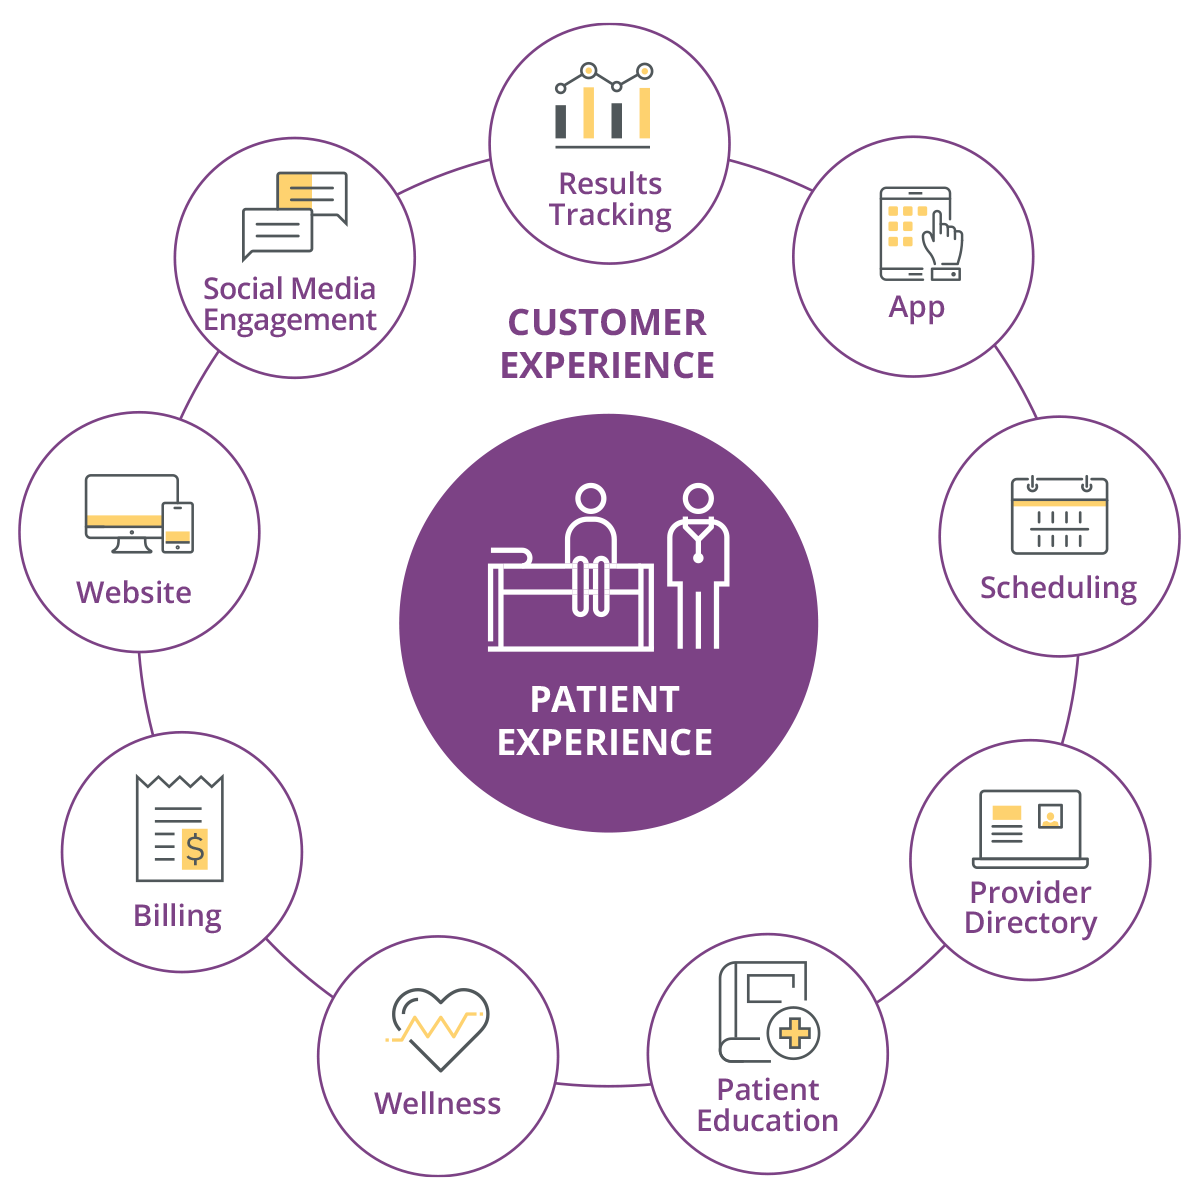 The Customer Experience graphic